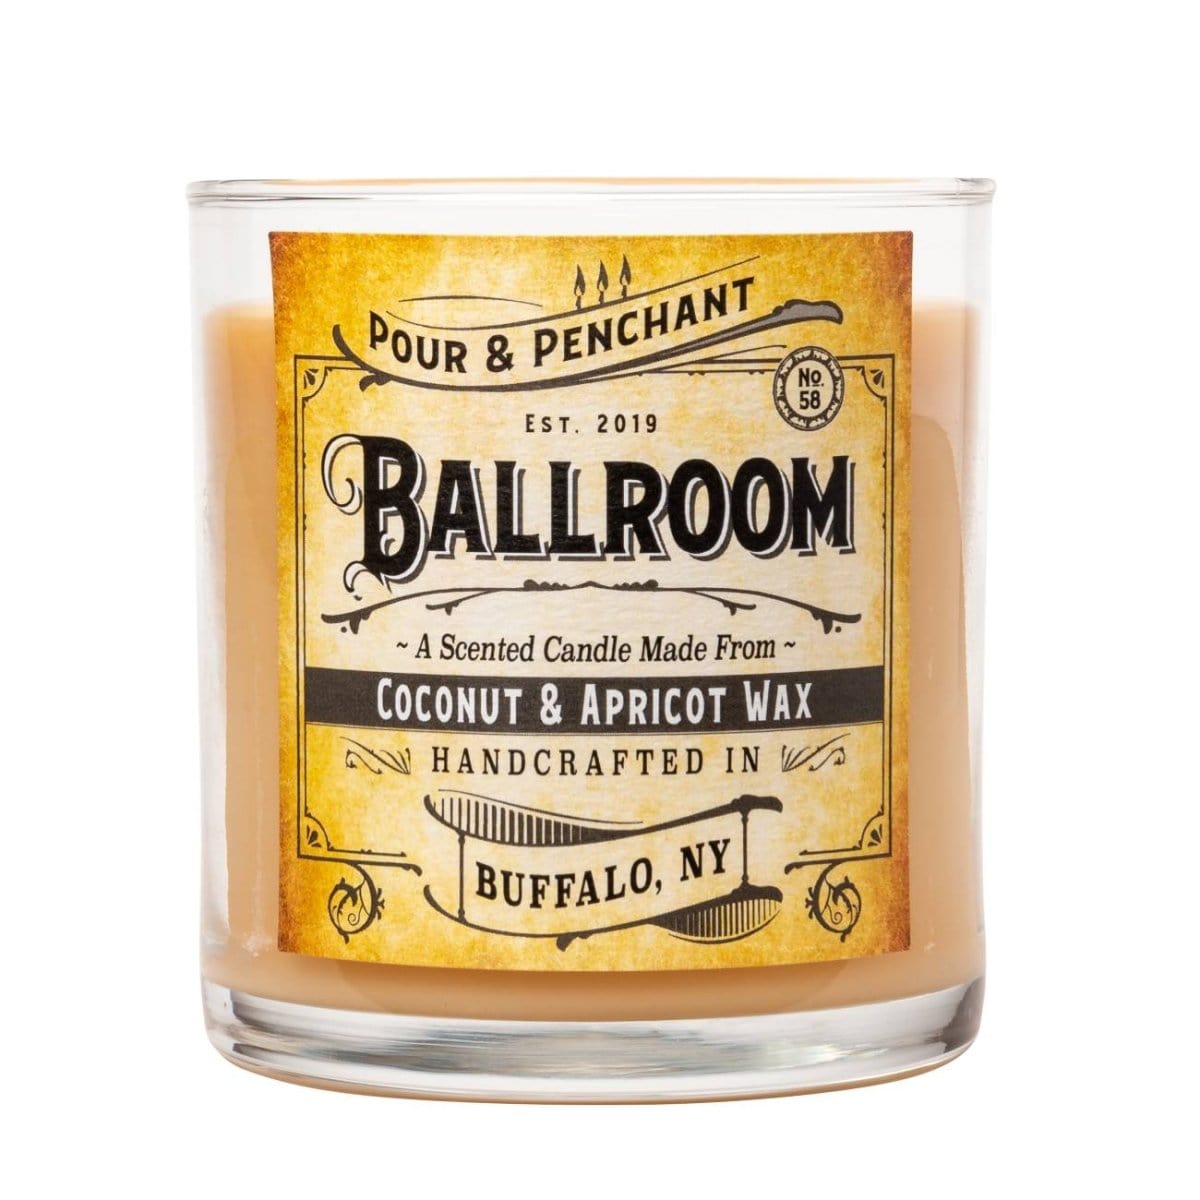 Pour & Penchant 10 oz Scented Candle - BALLROOM no.58 - Plum, Currant, Jasmine, Cherry & Amber